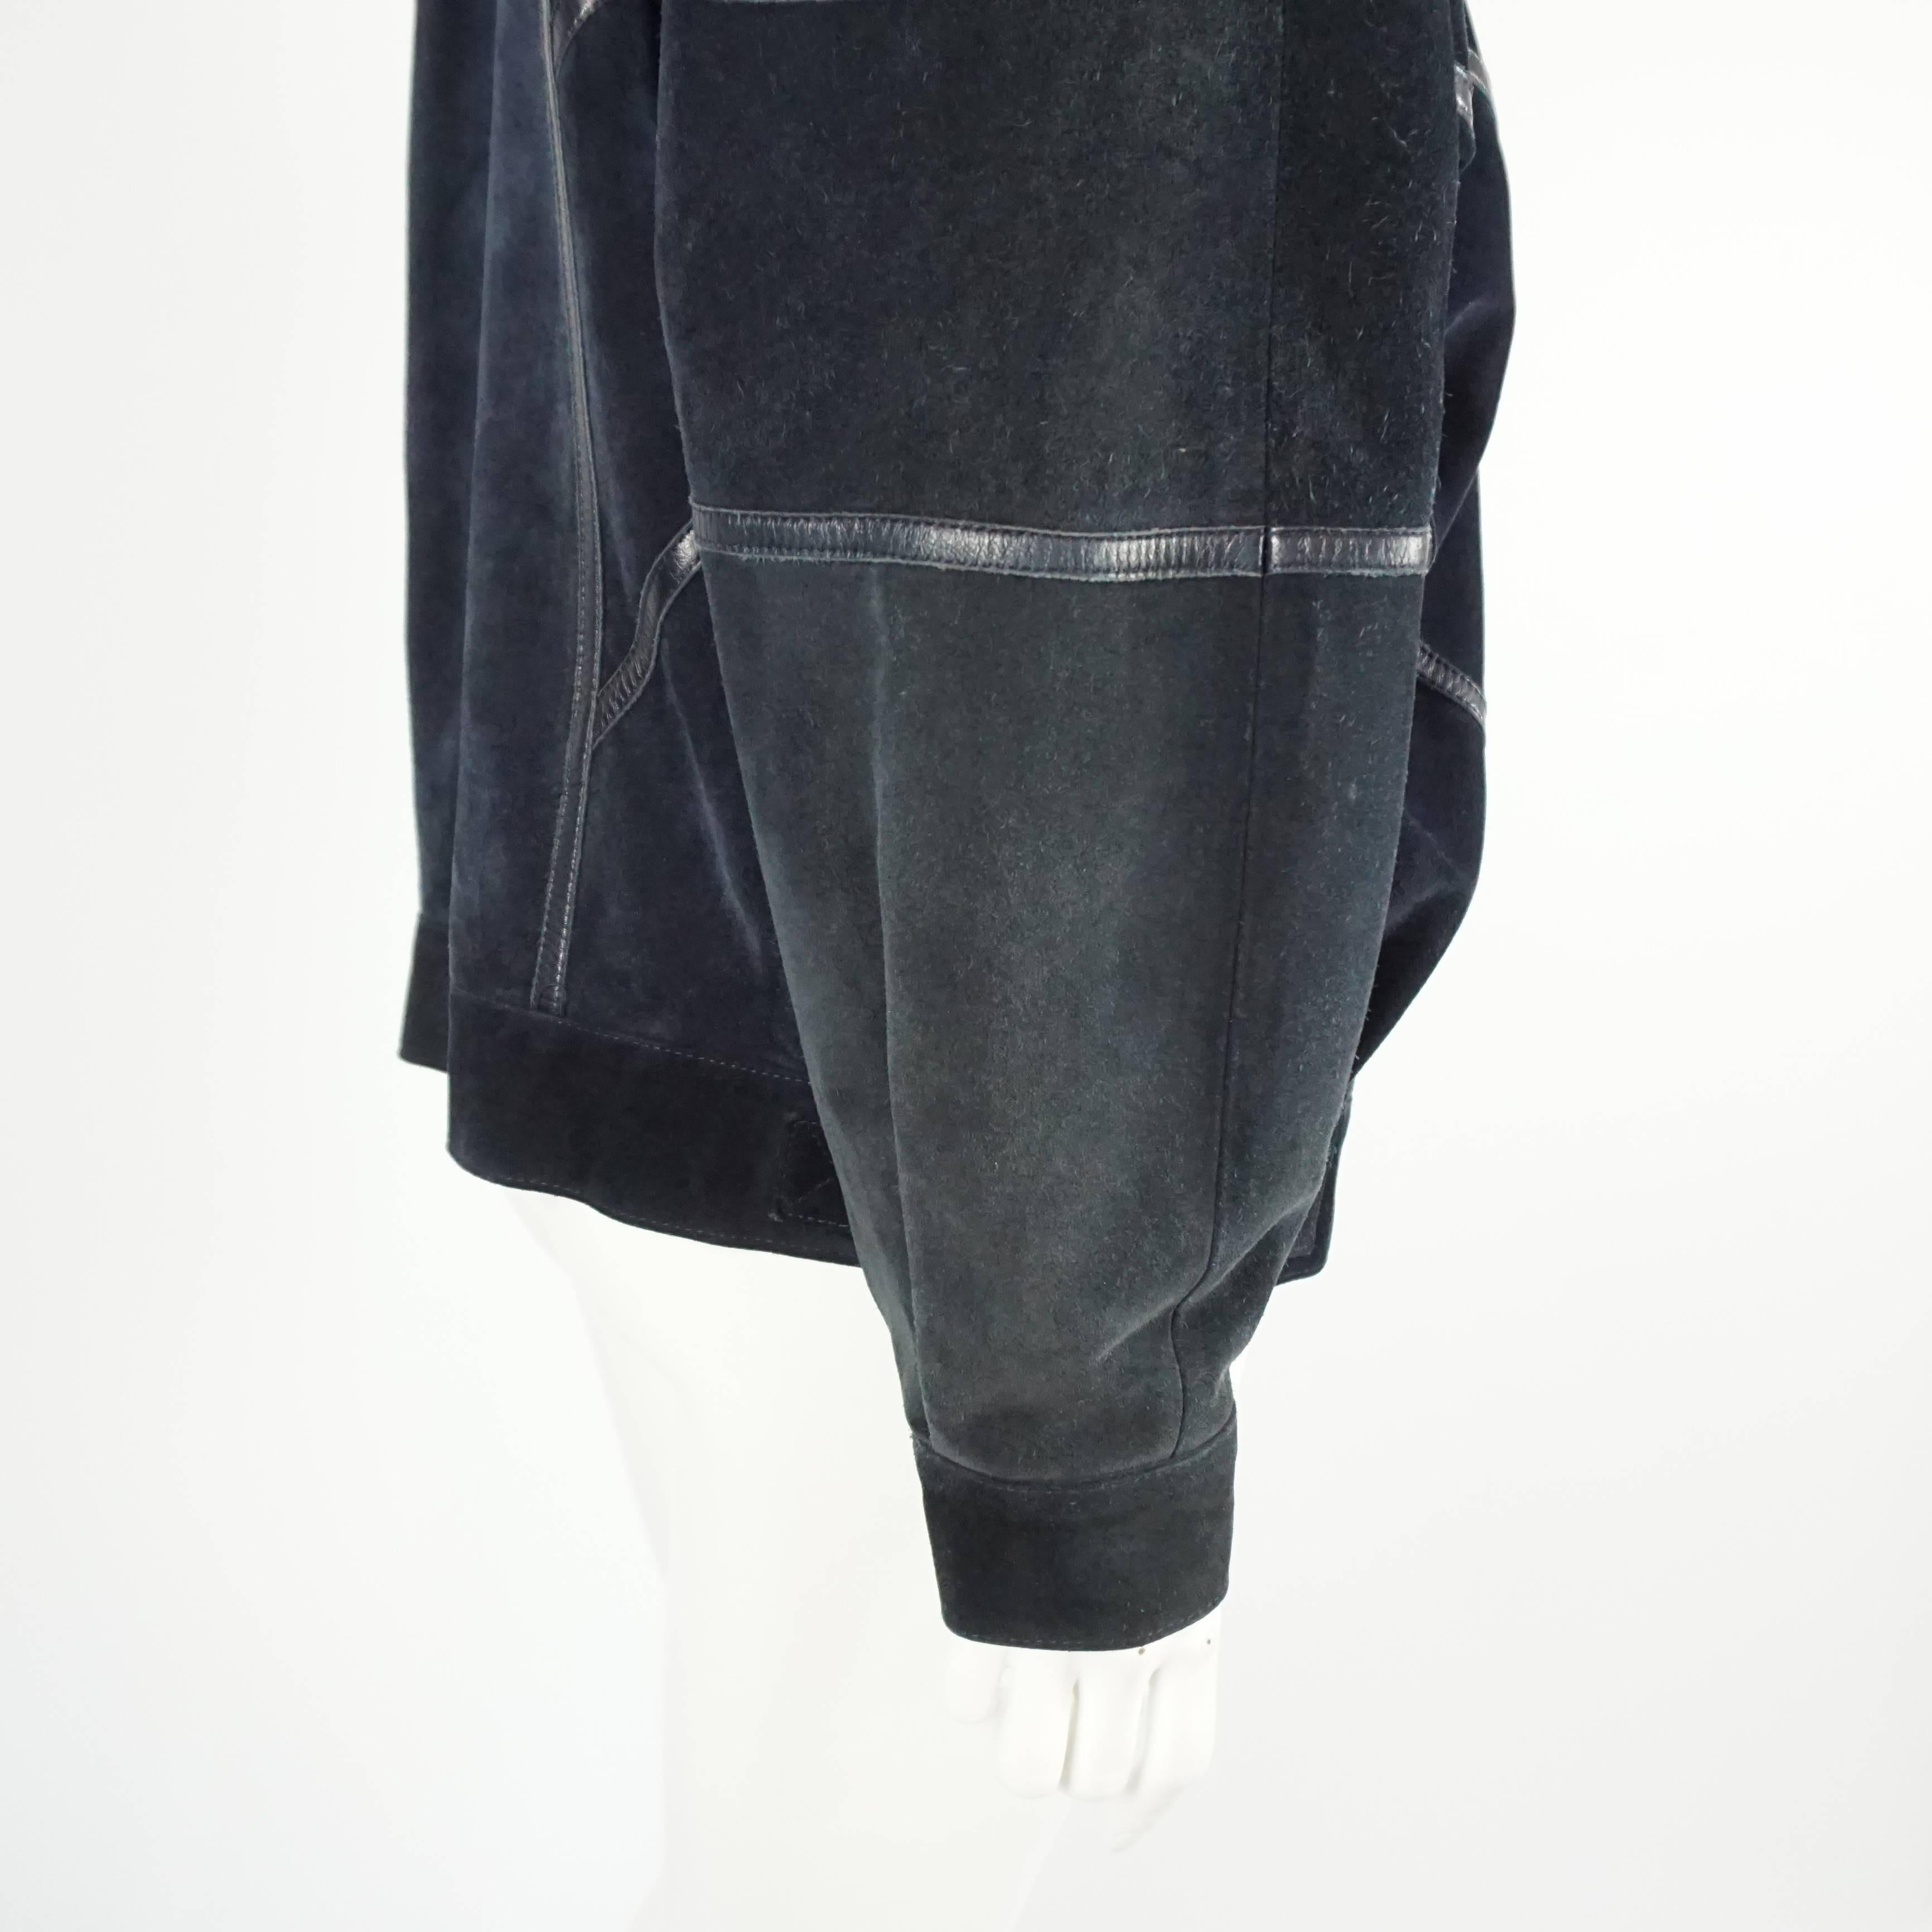 Celine Navy Suede and Leather Oversize Jacket - 42 - 1980s 2